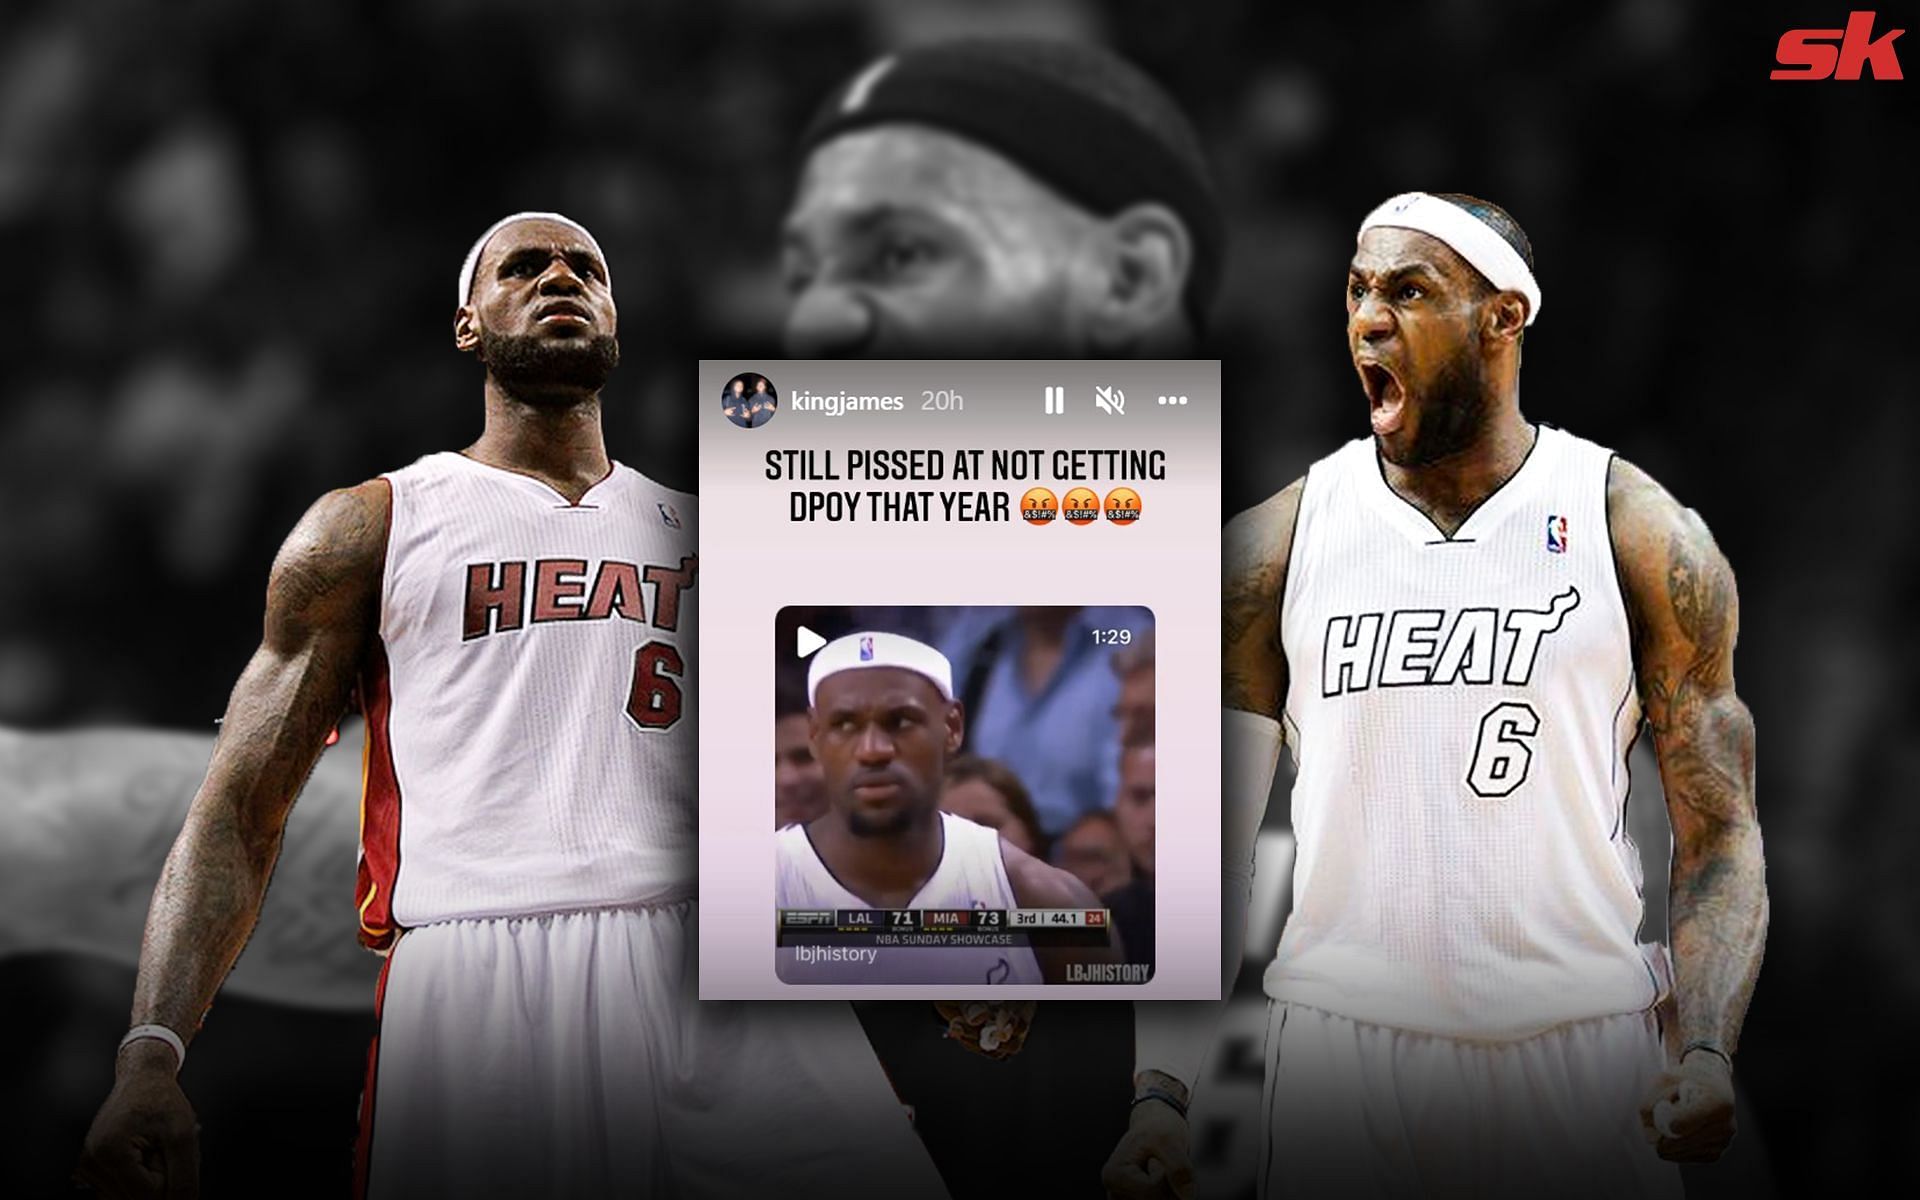 LeBron James 2012: A retrospective on the King's amazing year